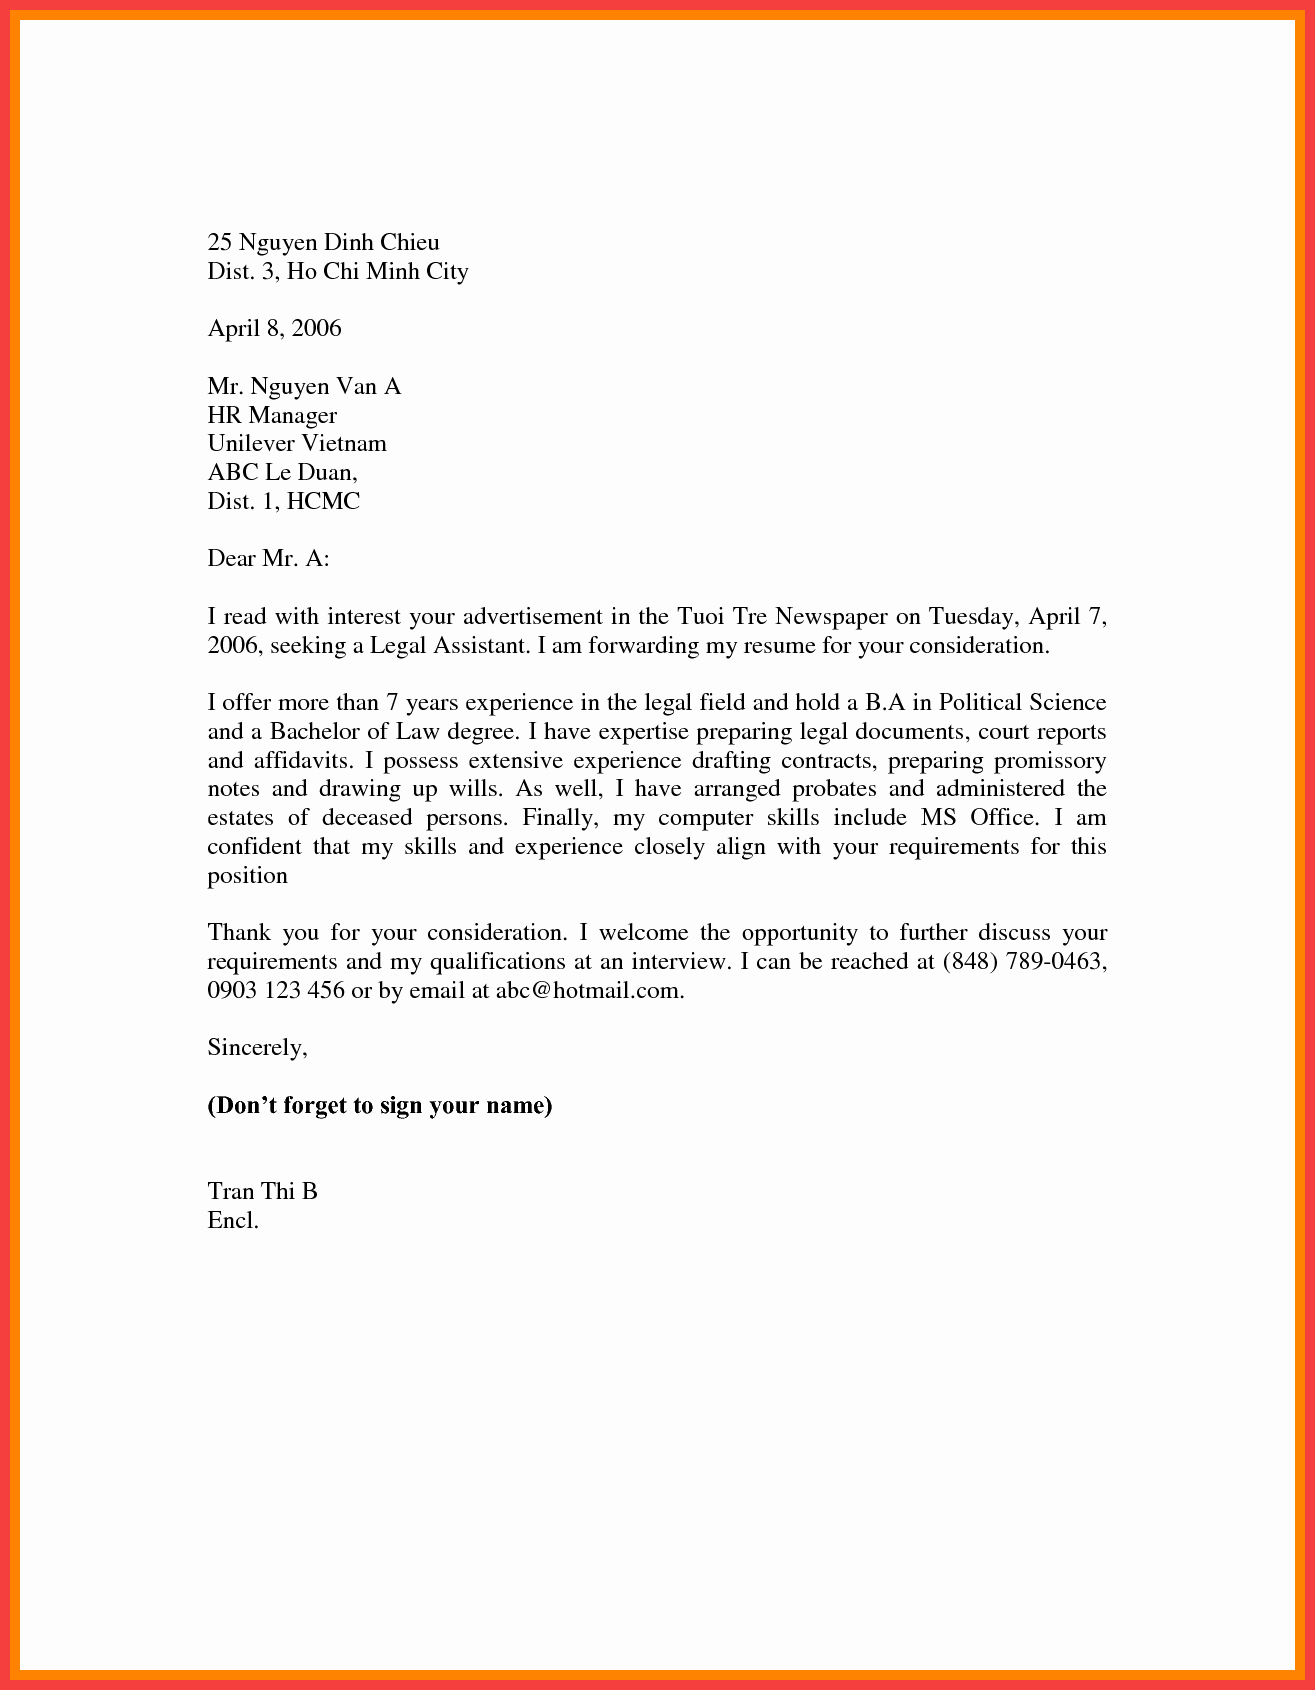 Sample Of Simple Cover Letter New Basic Cover Letter Template